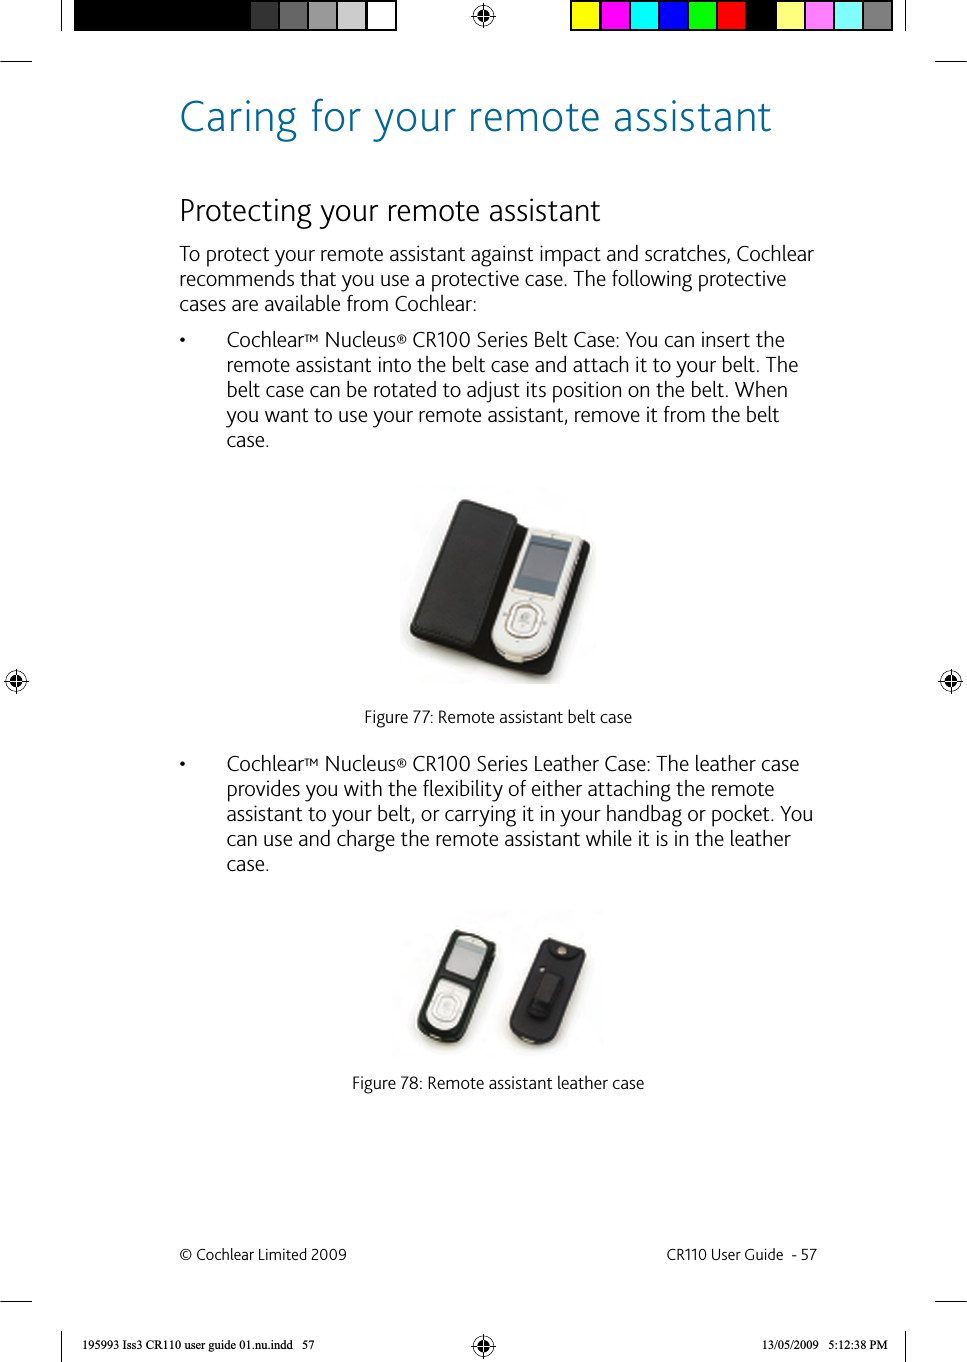 Caring for your remote assistant  Protecting your remote assistant To protect your remote assistant against impact and scratches, Cochlear recommends that you use a protective case. The following protective cases are available from Cochlear: •  Cochlear™ Nucleus® CR100 Series Belt Case: You can insert the remote assistant into the belt case and attach it to your belt. The belt case can be rotated to adjust its position on the belt. When you want to use your remote assistant, remove it from the belt case.Figure 77: Remote assistant belt case  •  Cochlear™ Nucleus® CR100 Series Leather Case: The leather case provides you with the ﬂ exibility of either attaching the remote assistant to your belt, or carrying it in your handbag or pocket. You can use and charge the remote assistant while it is in the leather case.Figure 78: Remote assistant leather case© Cochlear Limited 2009  CR110 User Guide  - 57195993 Iss3 CR110 user guide 01.nu.indd   57 13/05/2009   5:12:38 PM